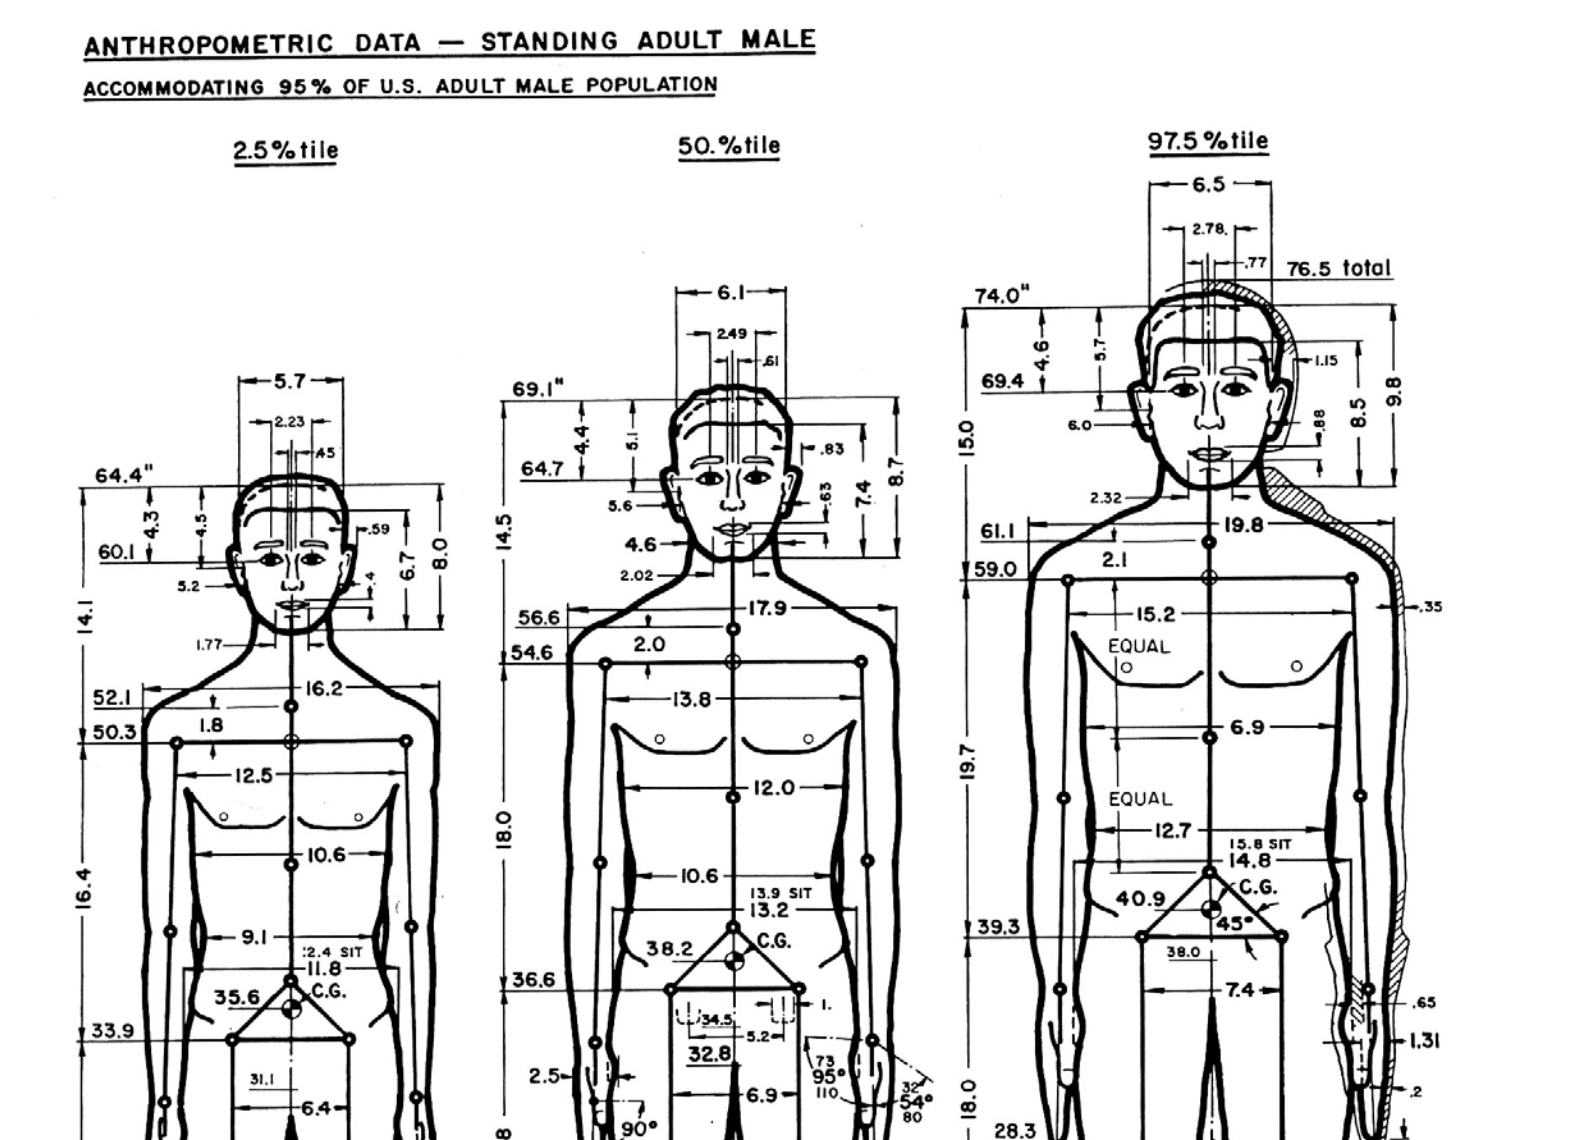 Image from The Measure of a Man: Human Factors in Design by Henry Dryfuss